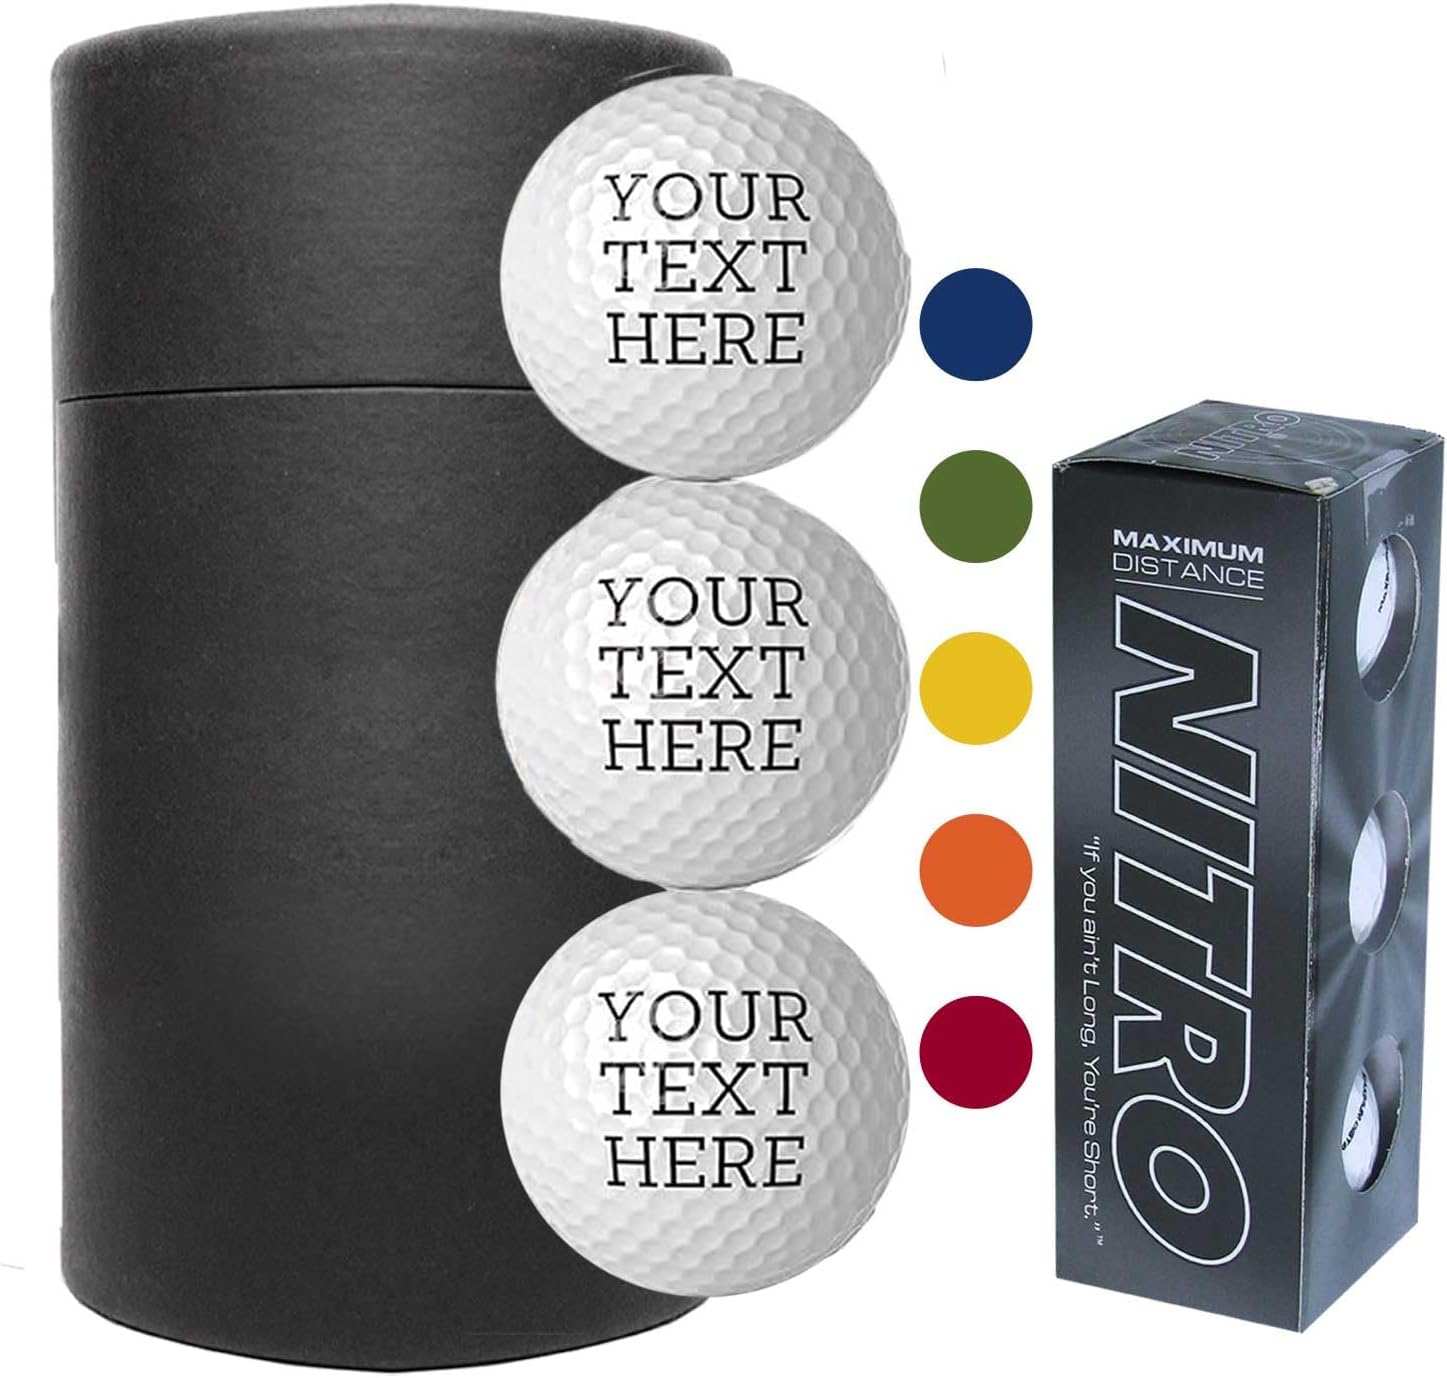 Spotted Dog Company Personalized 3pk Nitro Golf Balls - Golf Gifts for Men - Custom Golf Accessories - Cusomized Golf Balls for Men, Printed Your Text Here